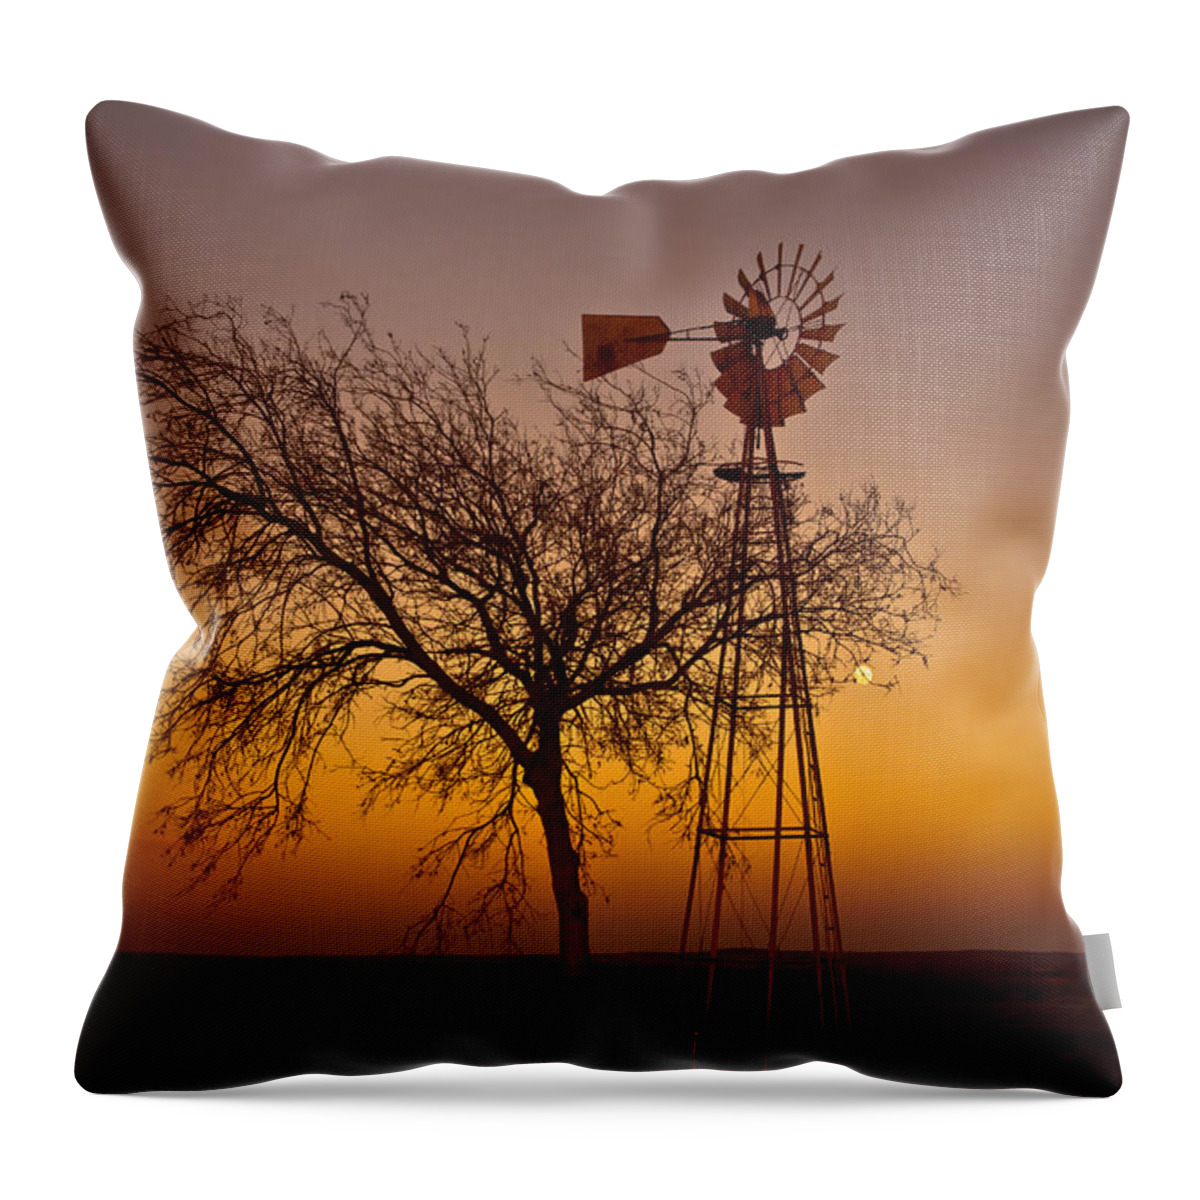 Landscape Throw Pillow featuring the photograph Twilight by Robert Frederick